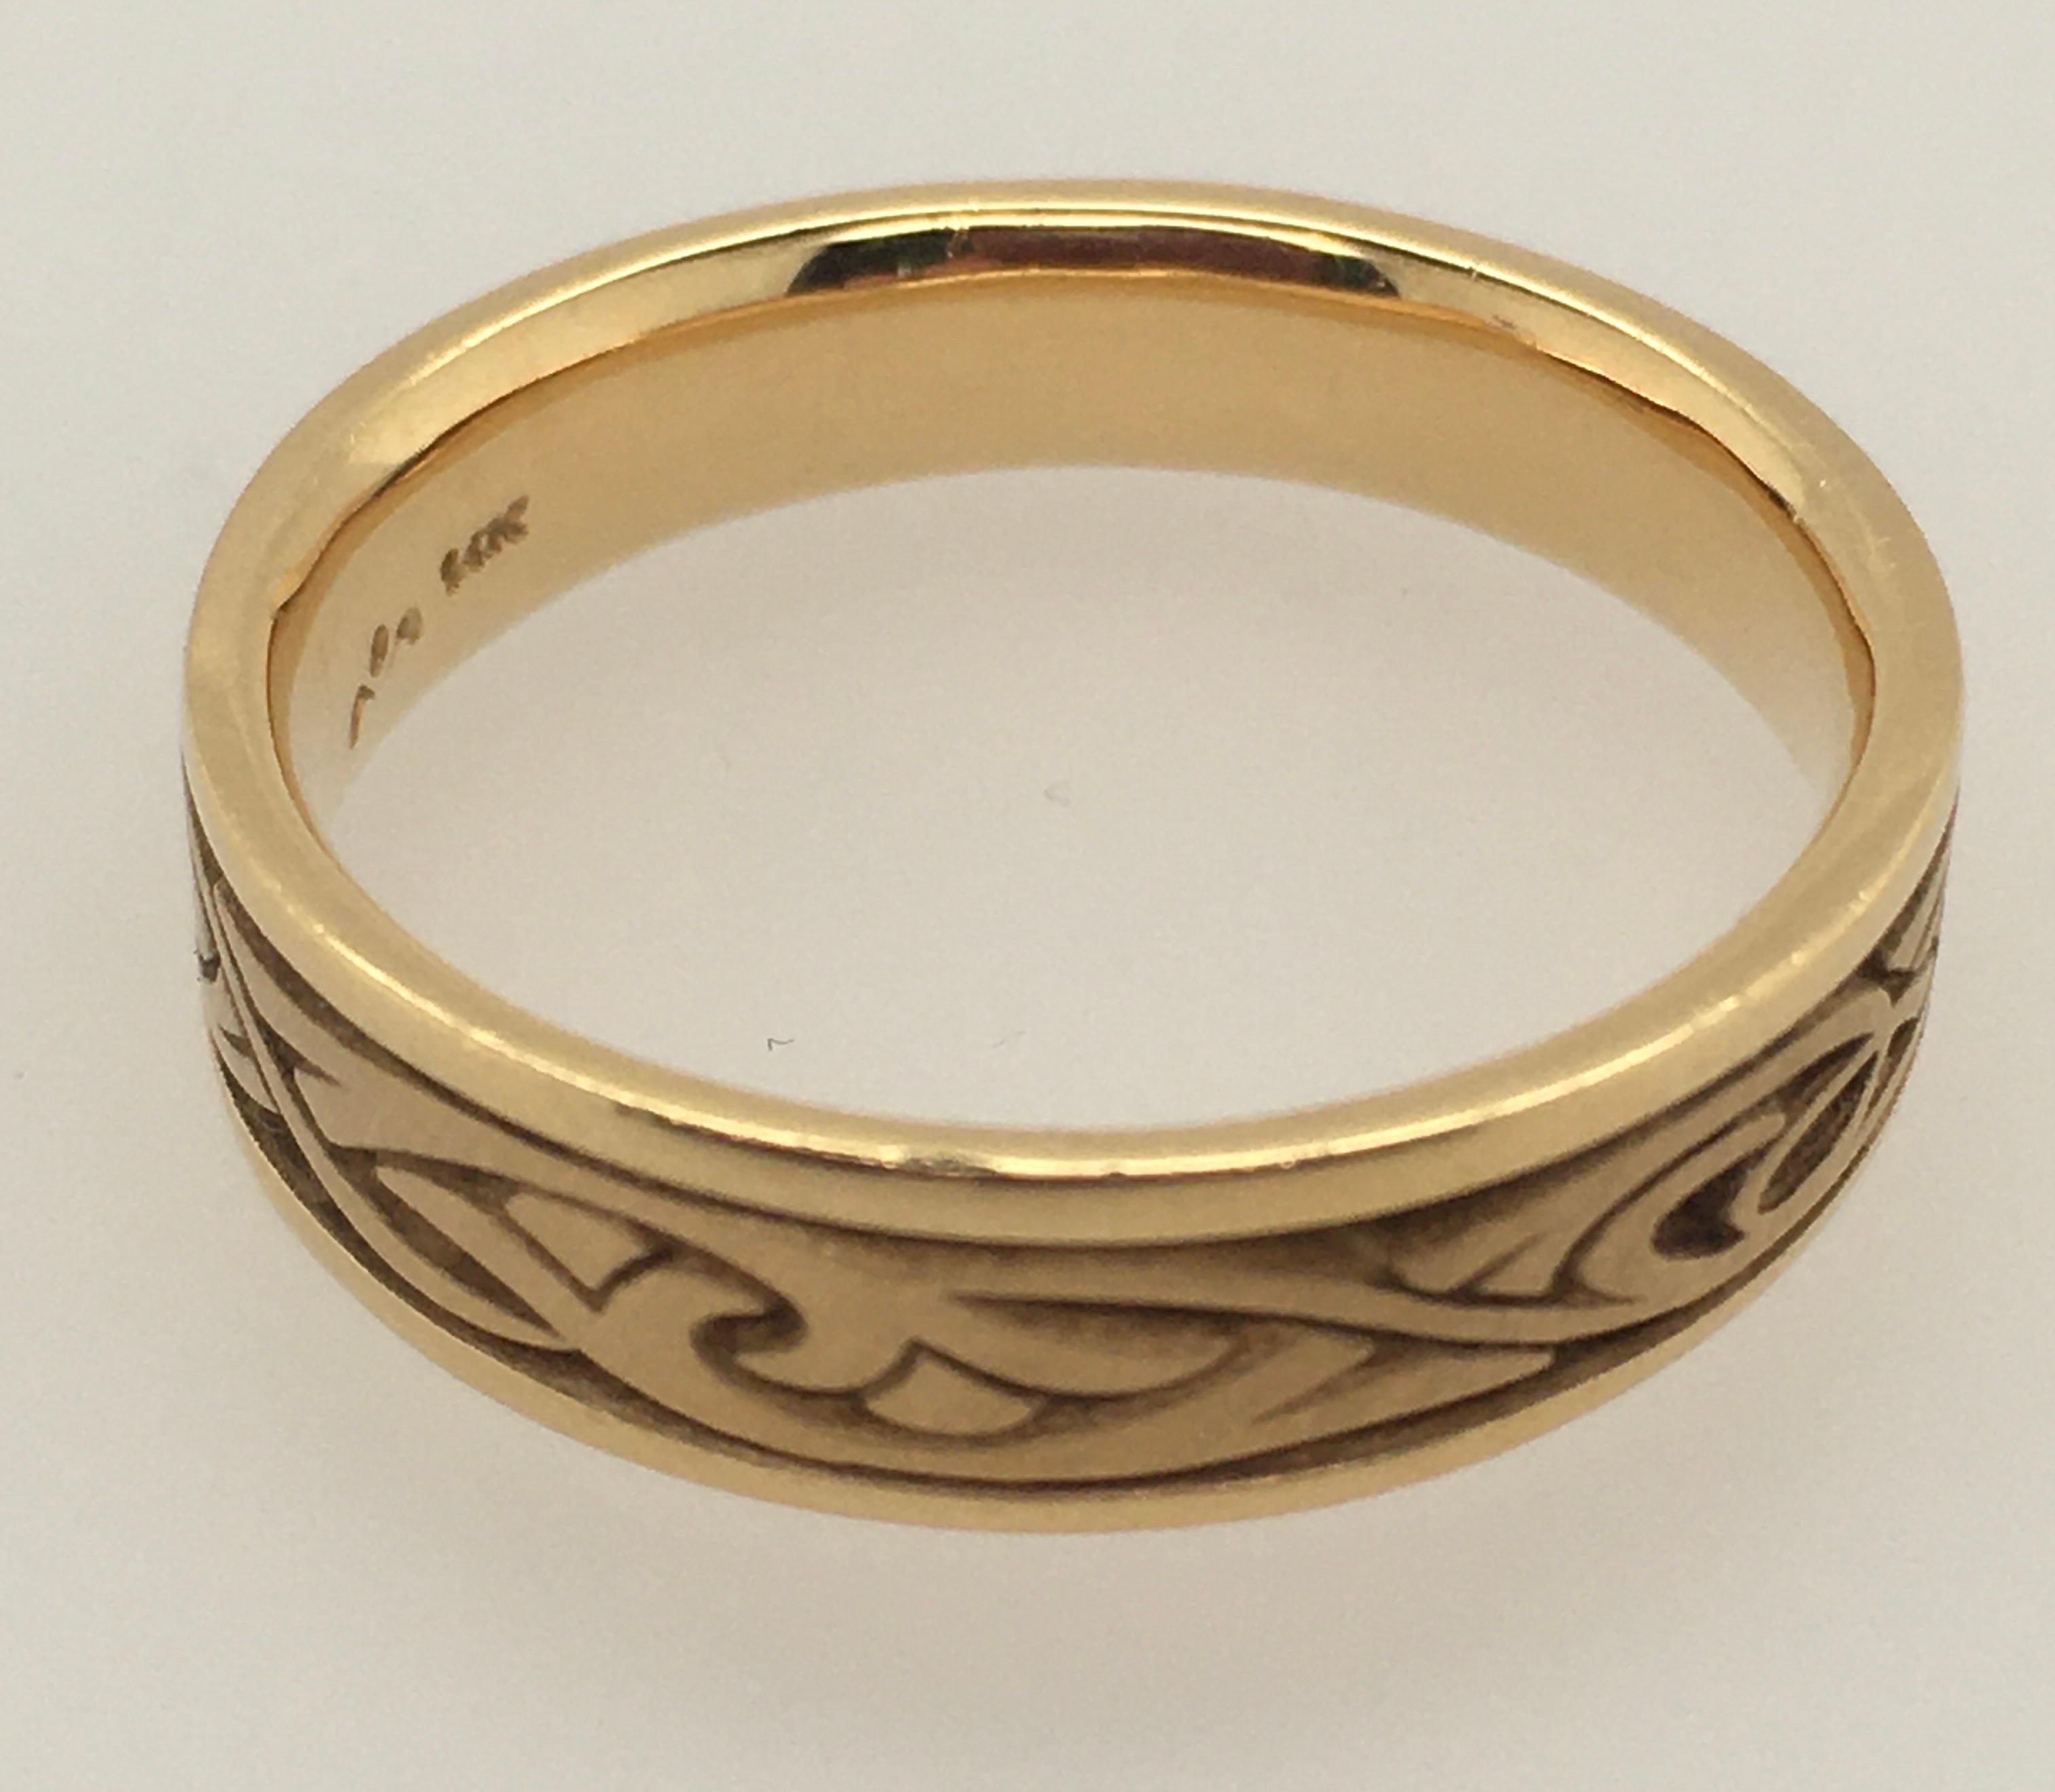 A dramatic Studio 311 14K yellow gold Narrow Papyrus Men's band, 6.0 mm at its widest, with flat polished edges to compliment the intricate Papyrus pattern.  Style number is 11281.  The Comfort Fit ring is currently size 10.5; the design allows for